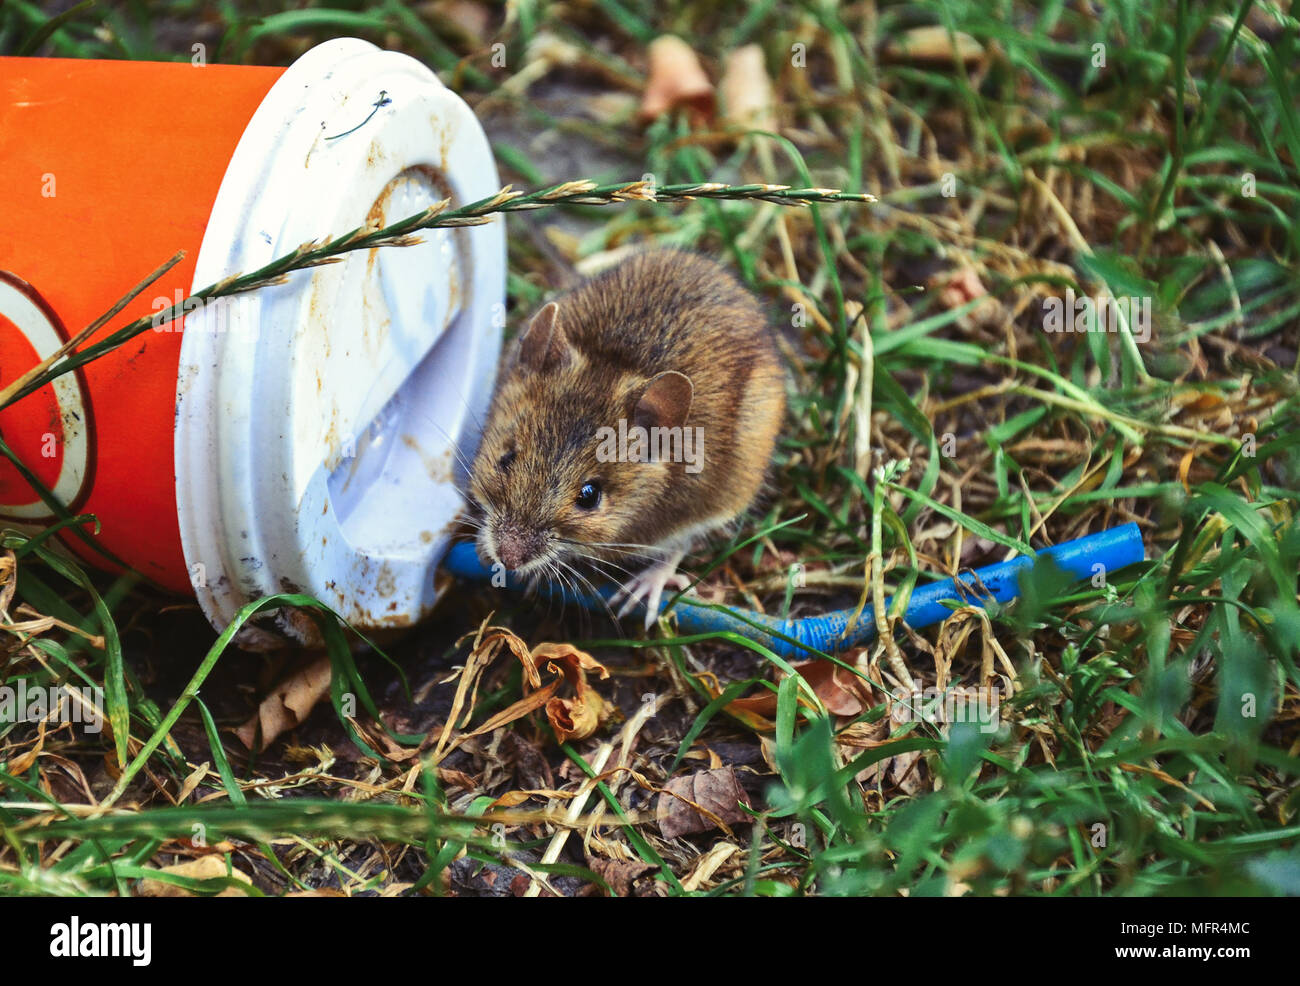 Cute little rat sitting near thrown plastic cup looking at camera Stock Photo